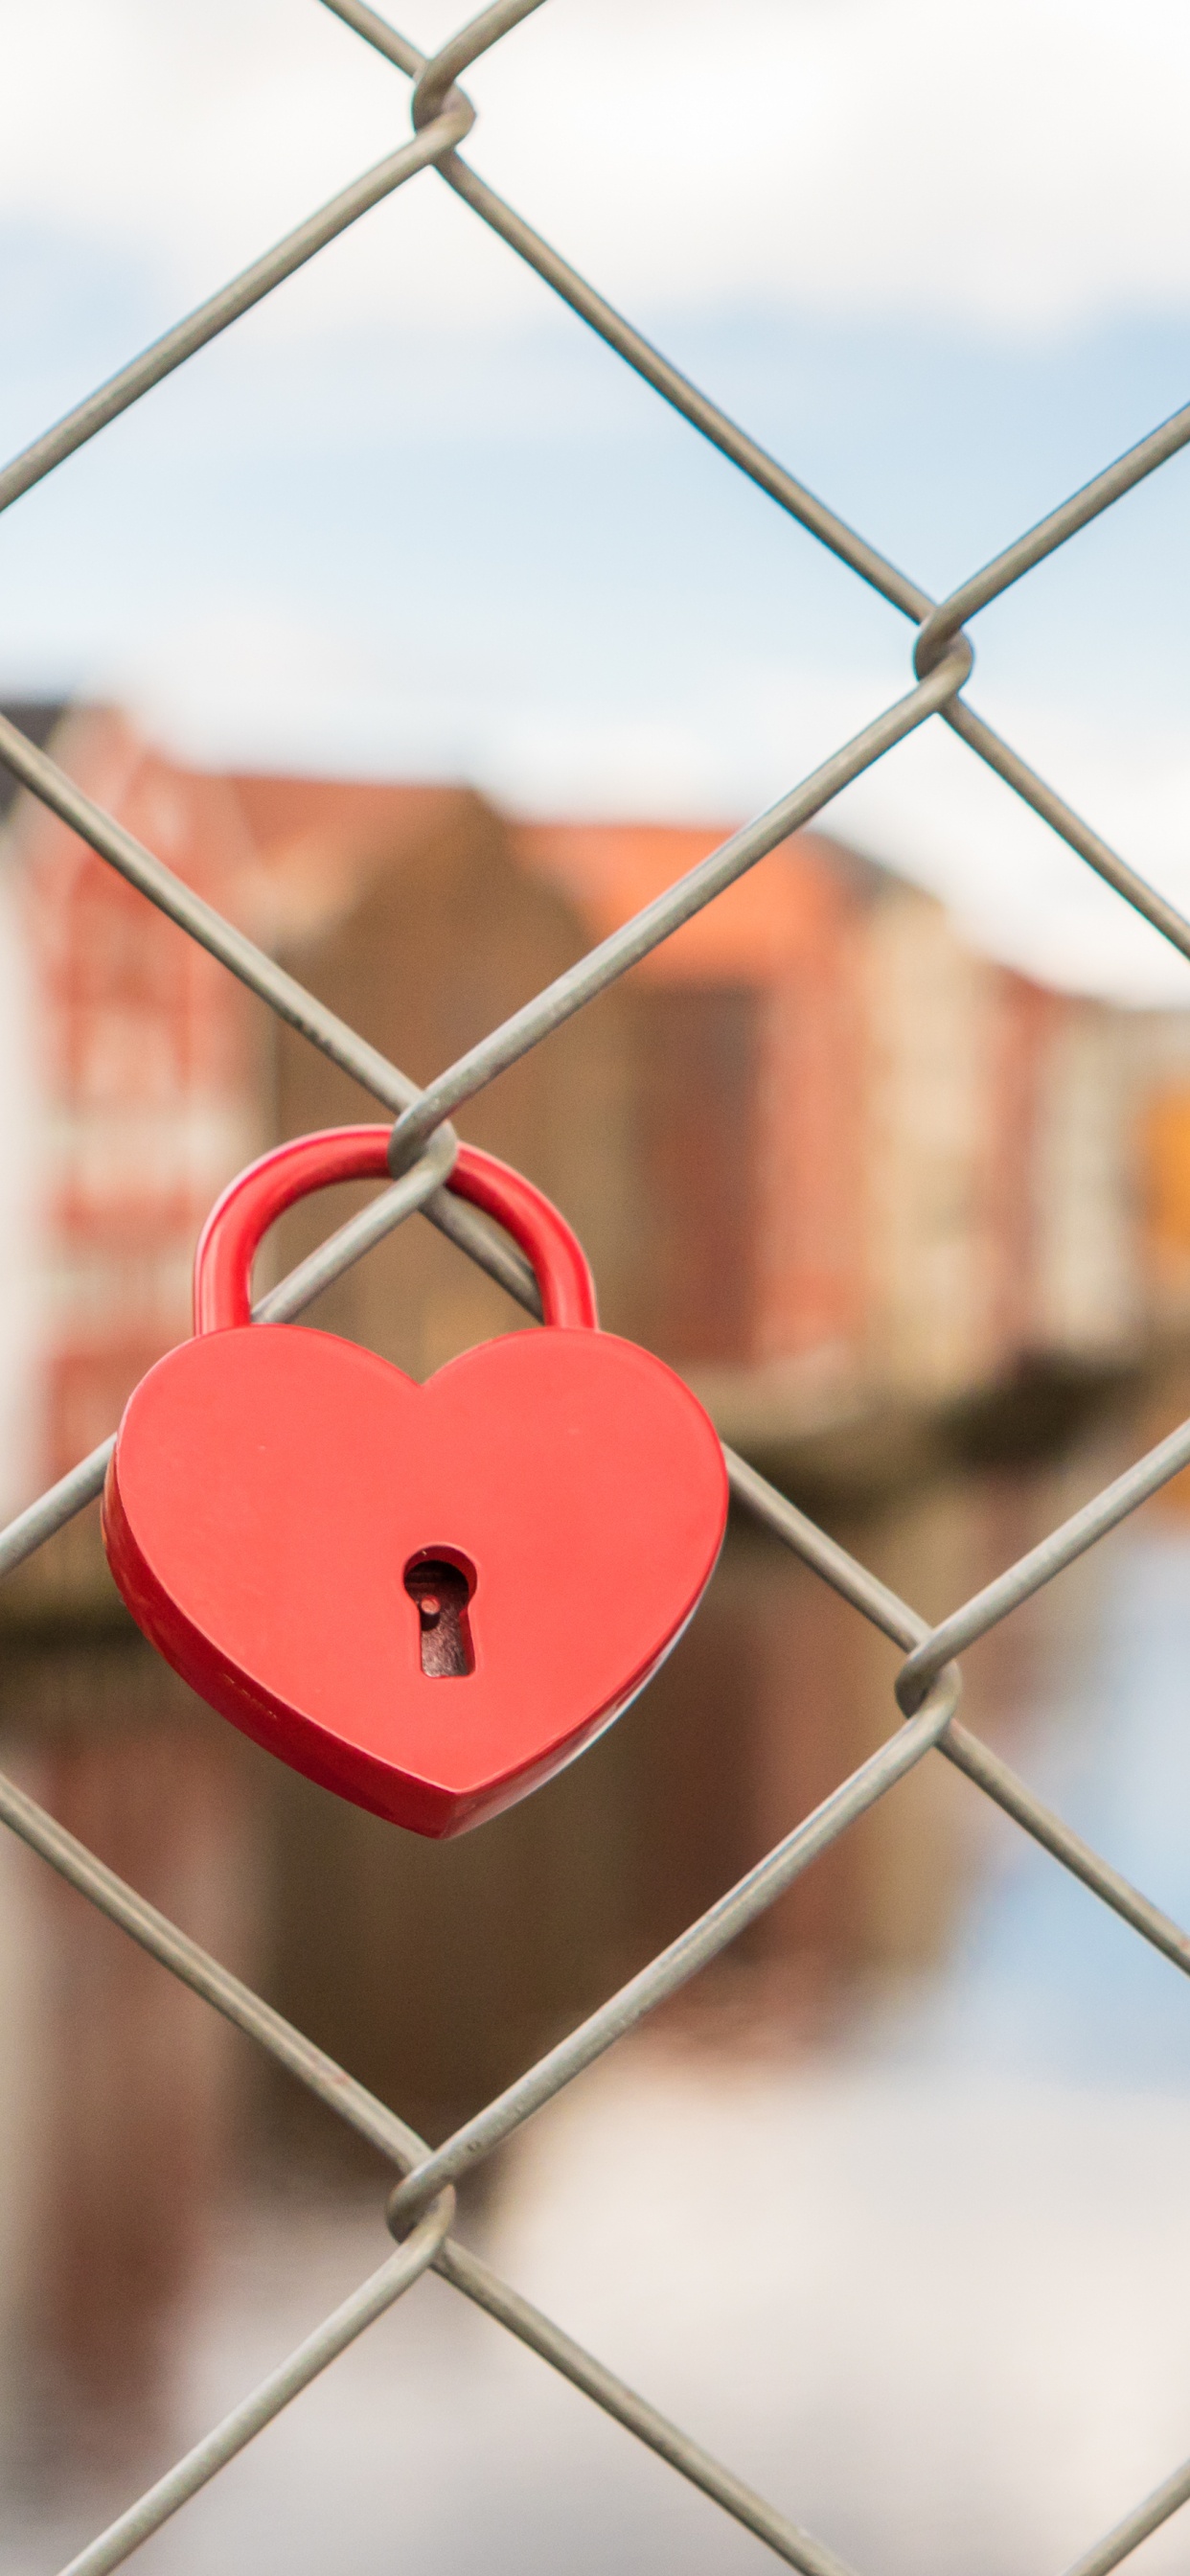 Wire Fencing, Padlock, Lock, Red, Mesh. Wallpaper in 1242x2688 Resolution